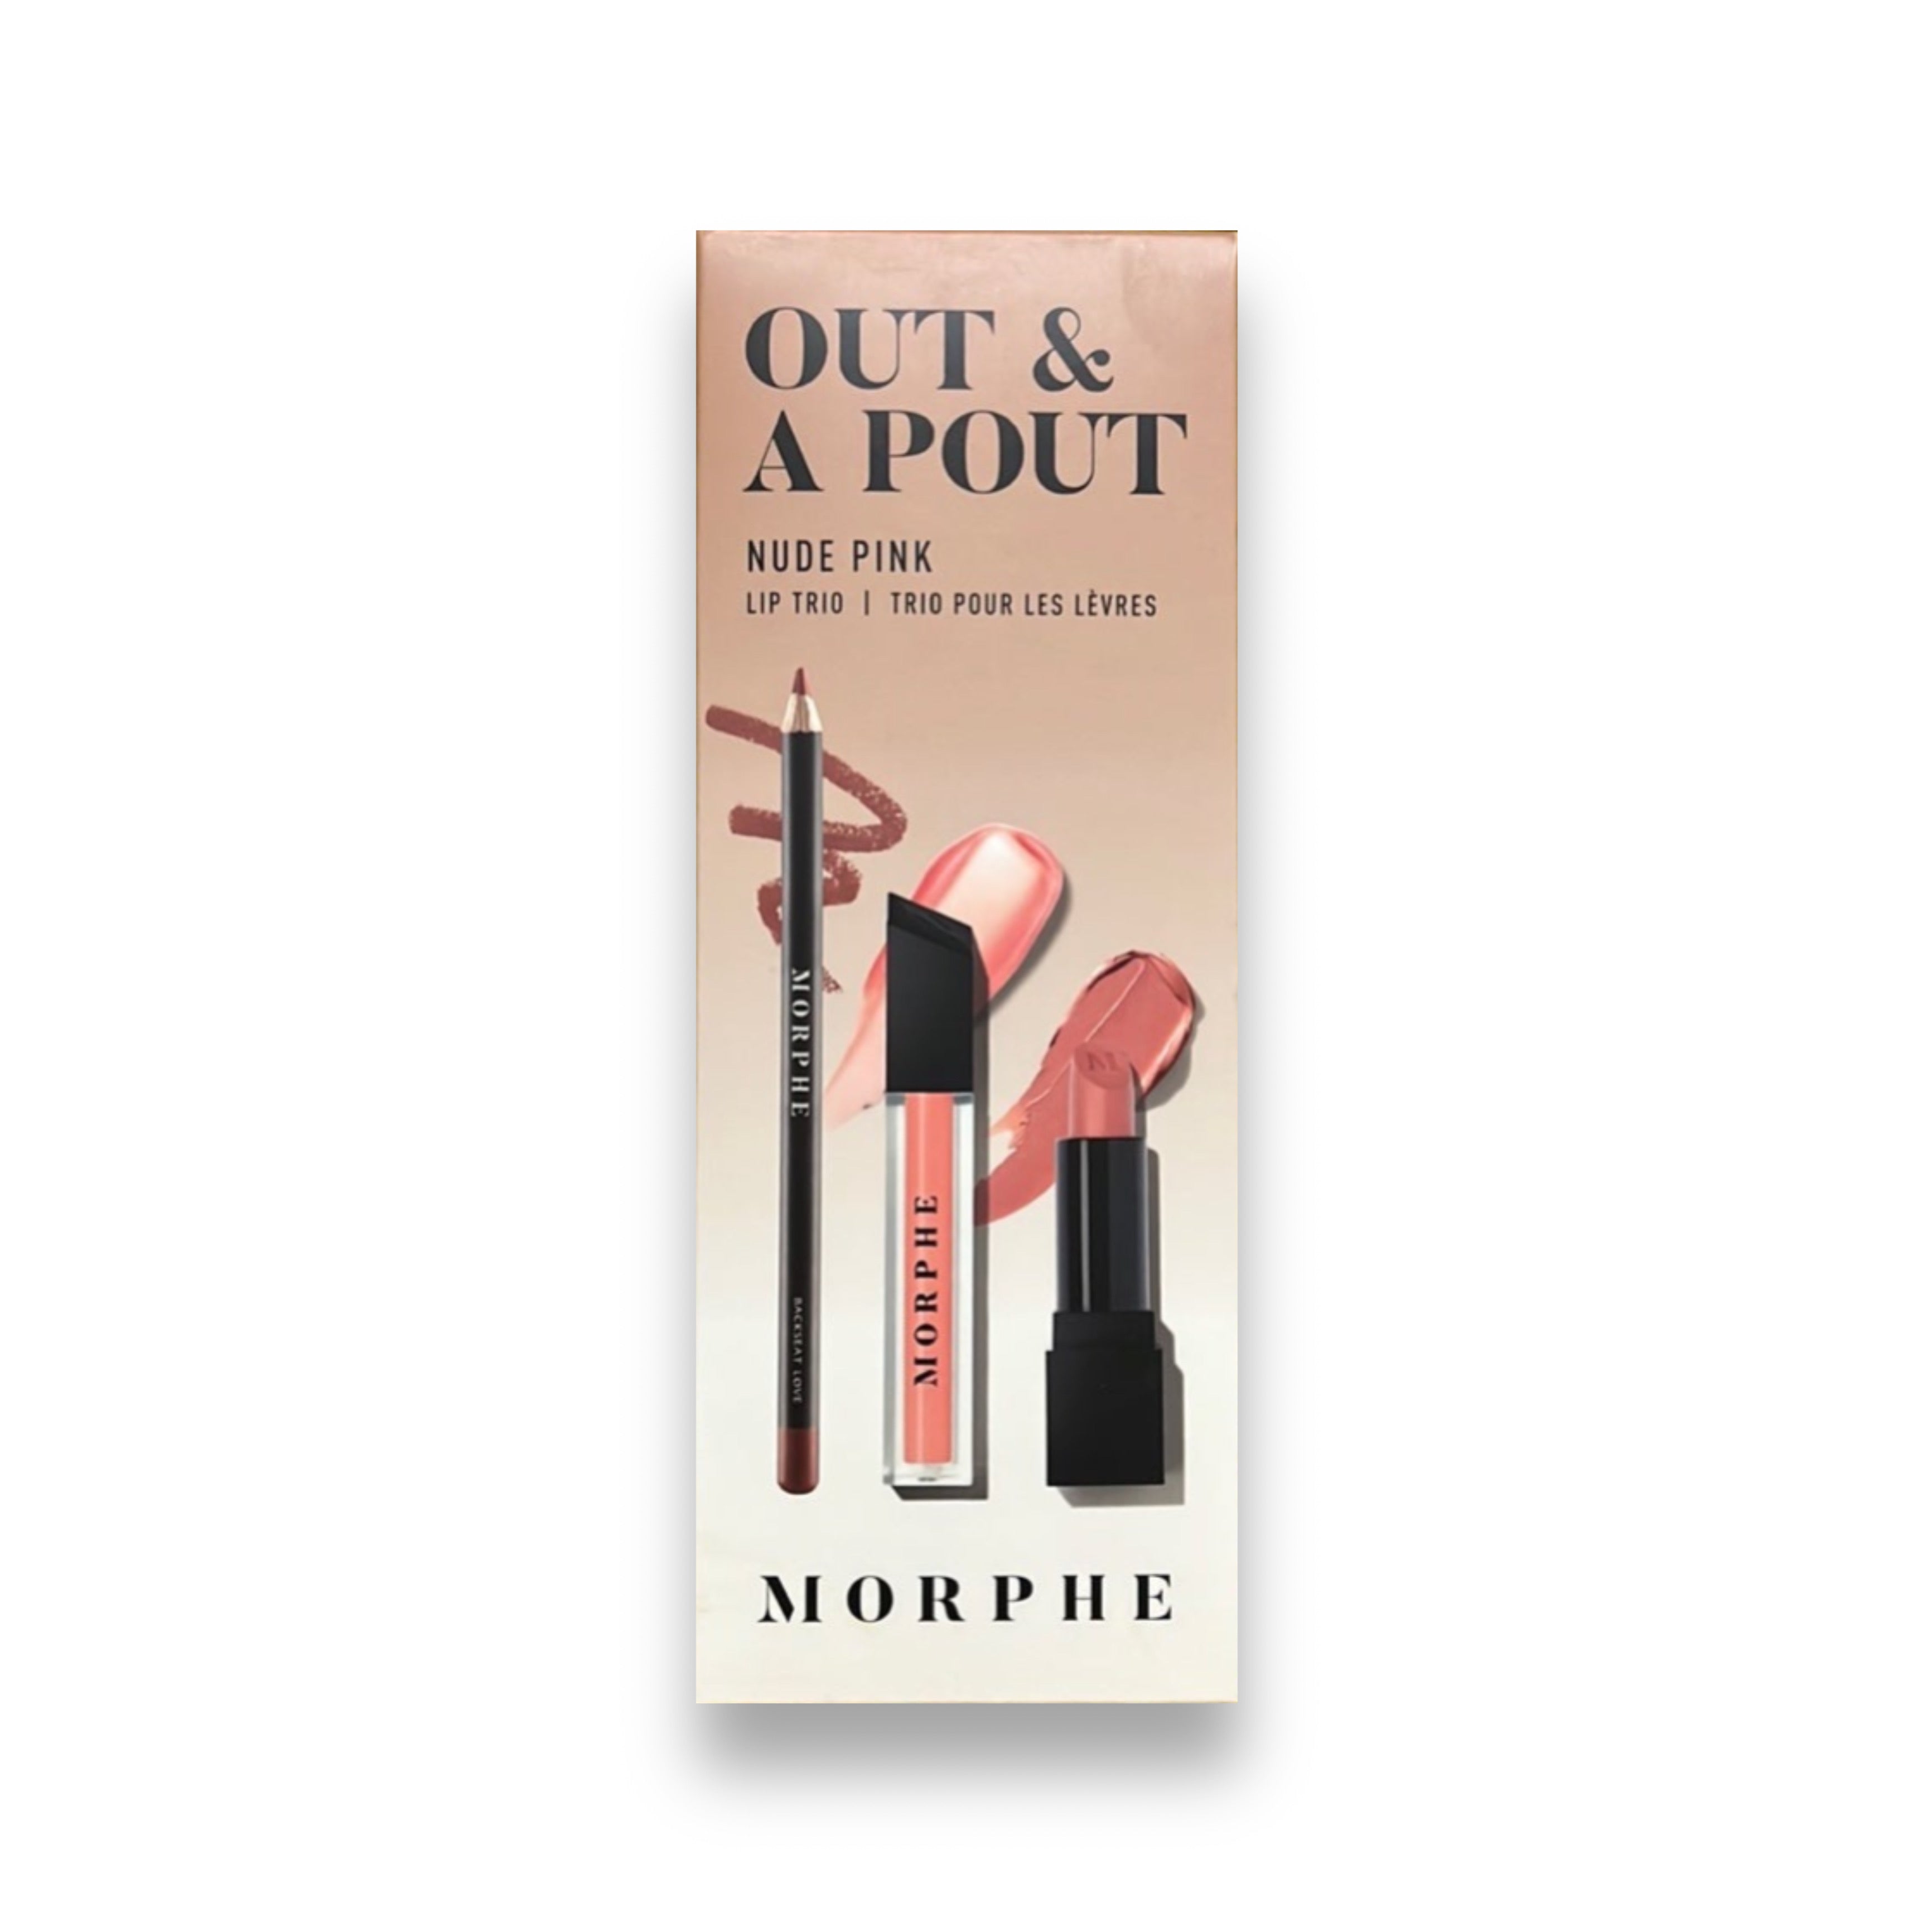 Morphe OUT & A POUT NUDE PINK LIP TRIO مجموعه مكياج الشفاه